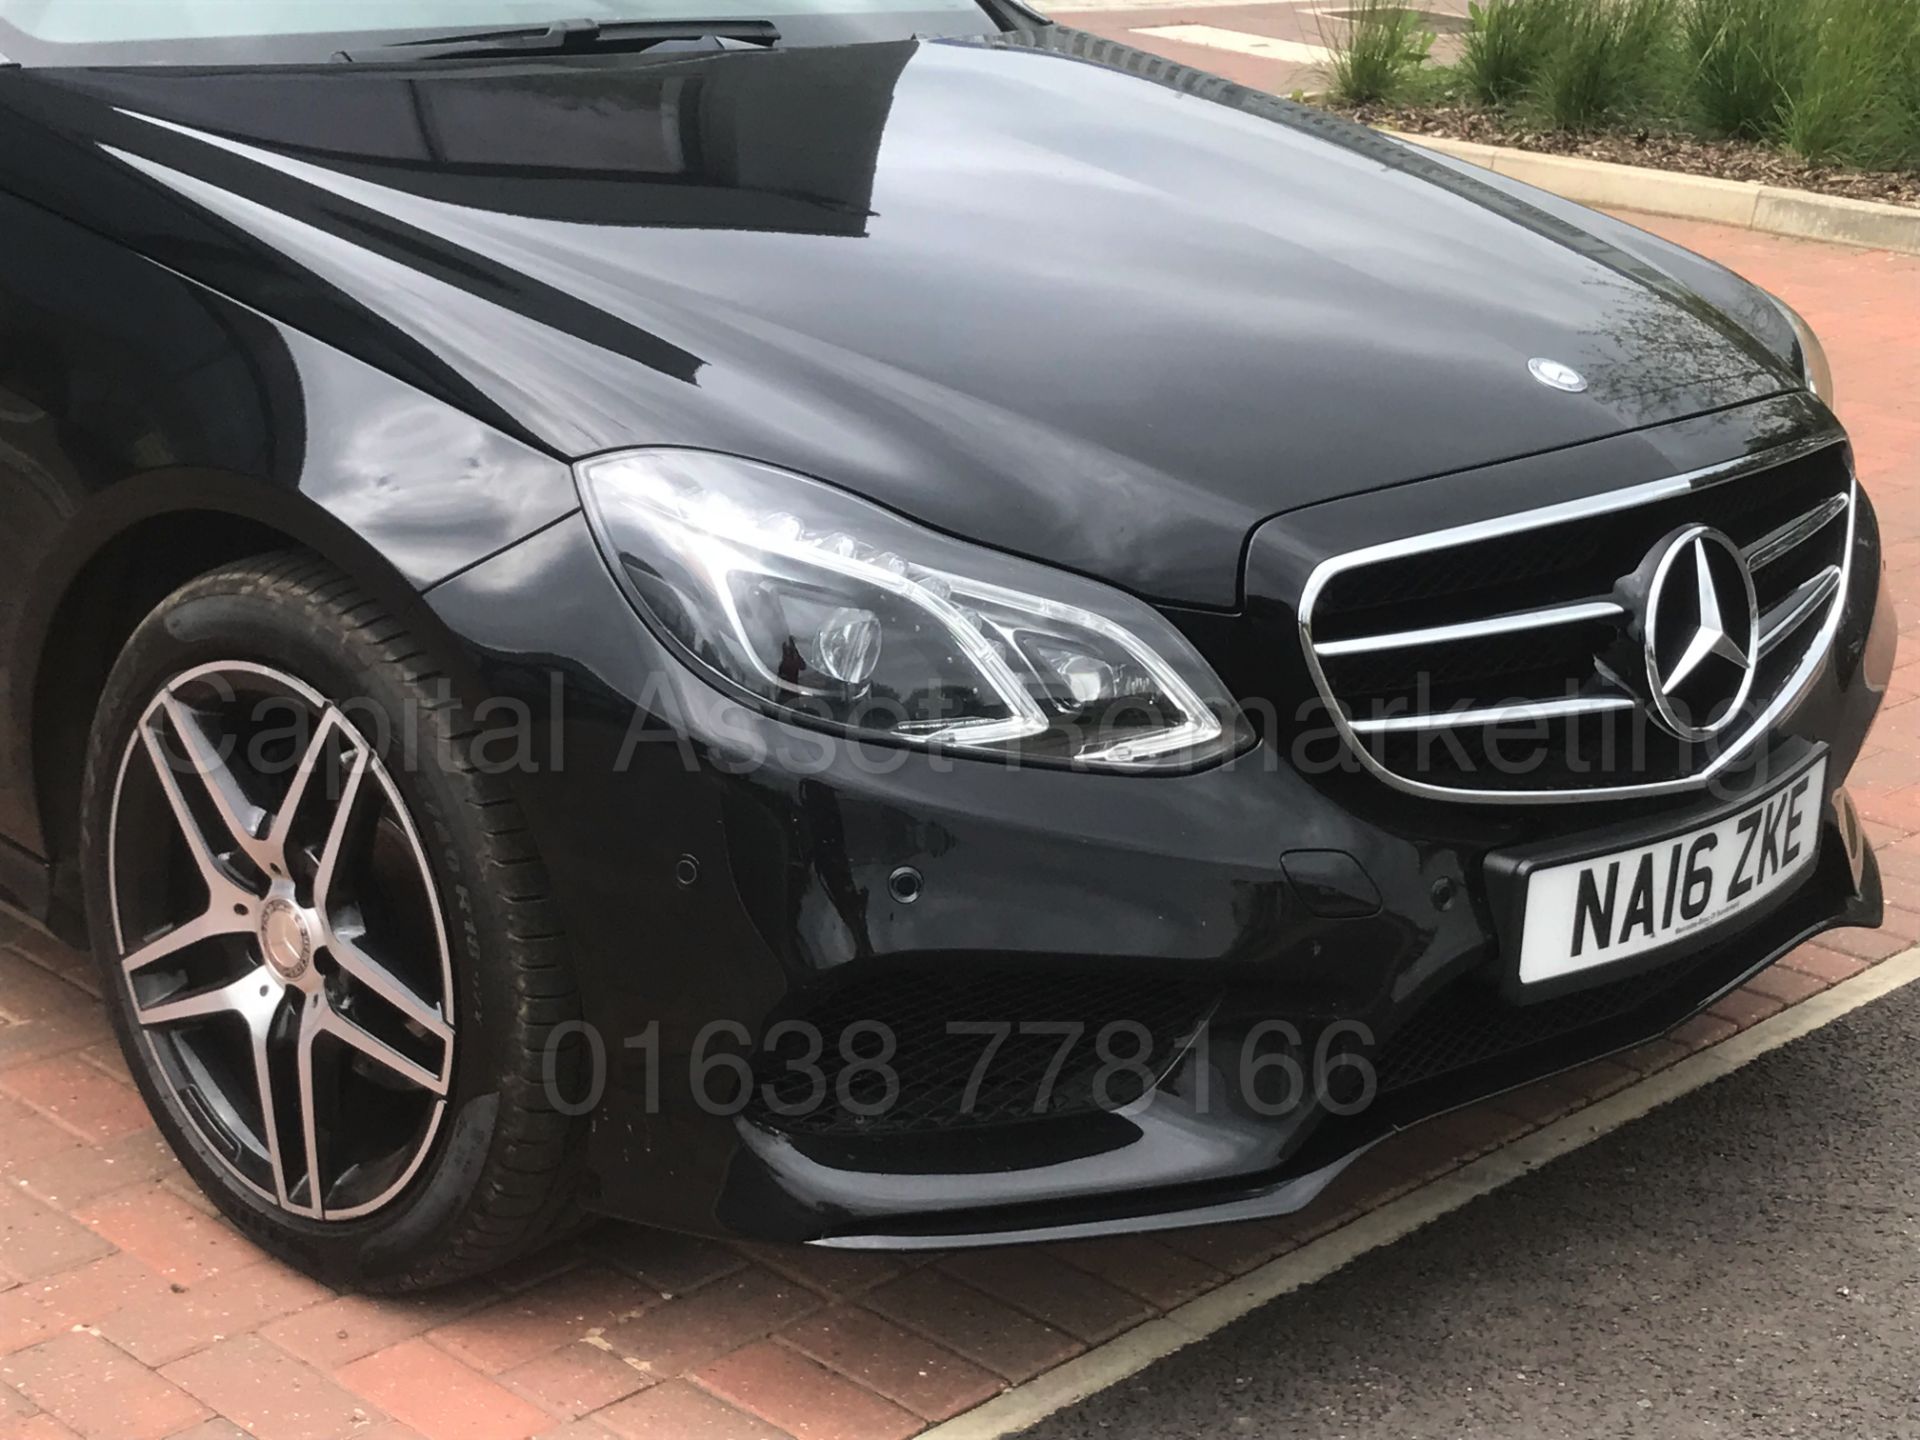 (On Sale)MERCEDES-BENZ E220D 'AMG NIGHT EDITION - PREMIUM' (2016) 'AUTO' - LEATHER - NAV - PAN ROOF* - Image 15 of 50